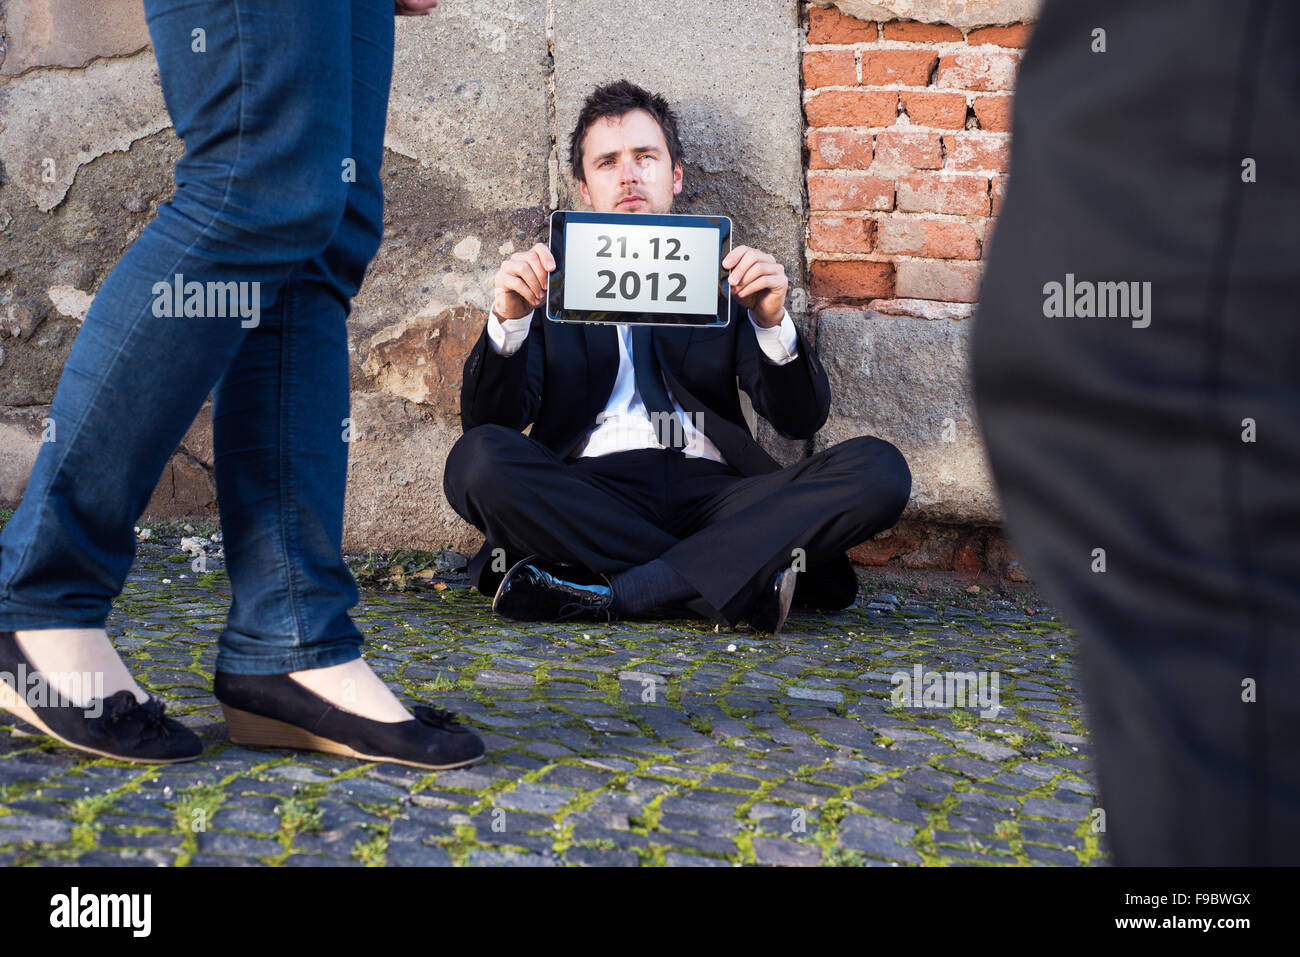 Man is waiting for end of the world. Stock Photo